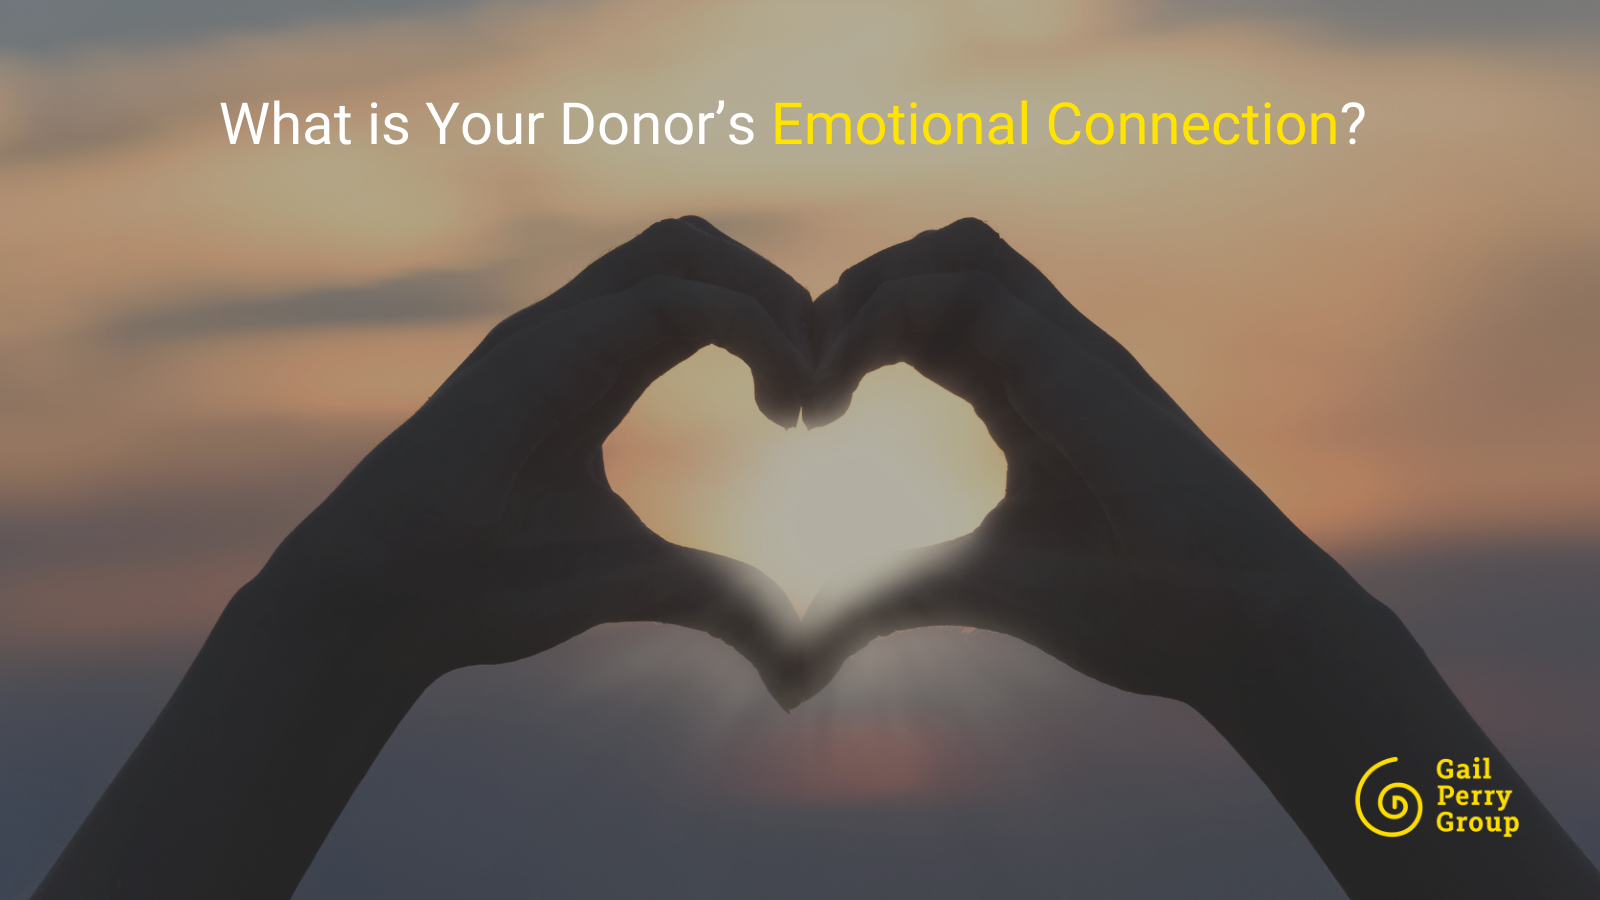 What is Your Donor’s Emotional Connection?